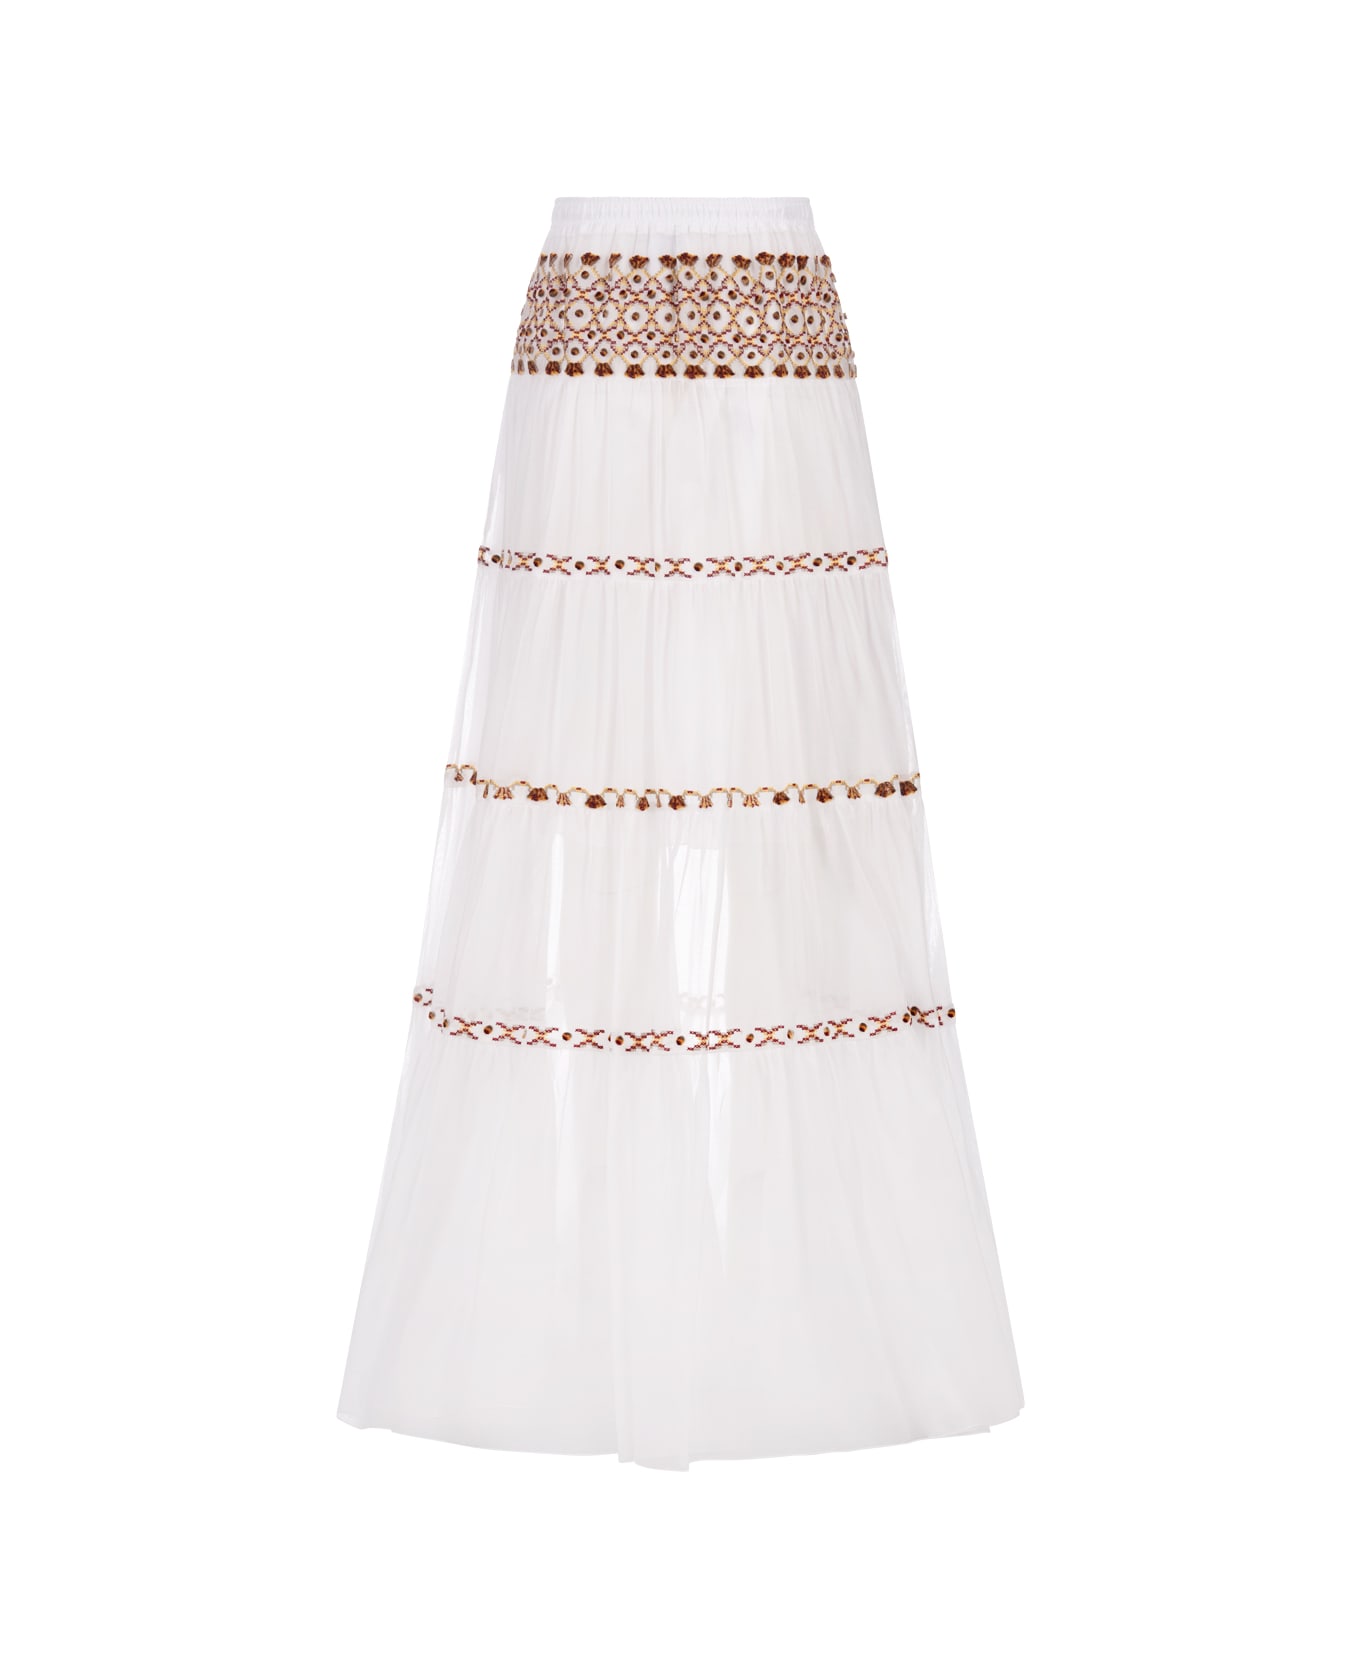 Ermanno Scervino White Muslin Long Skirt With Ethnic Embroidery - White スカート